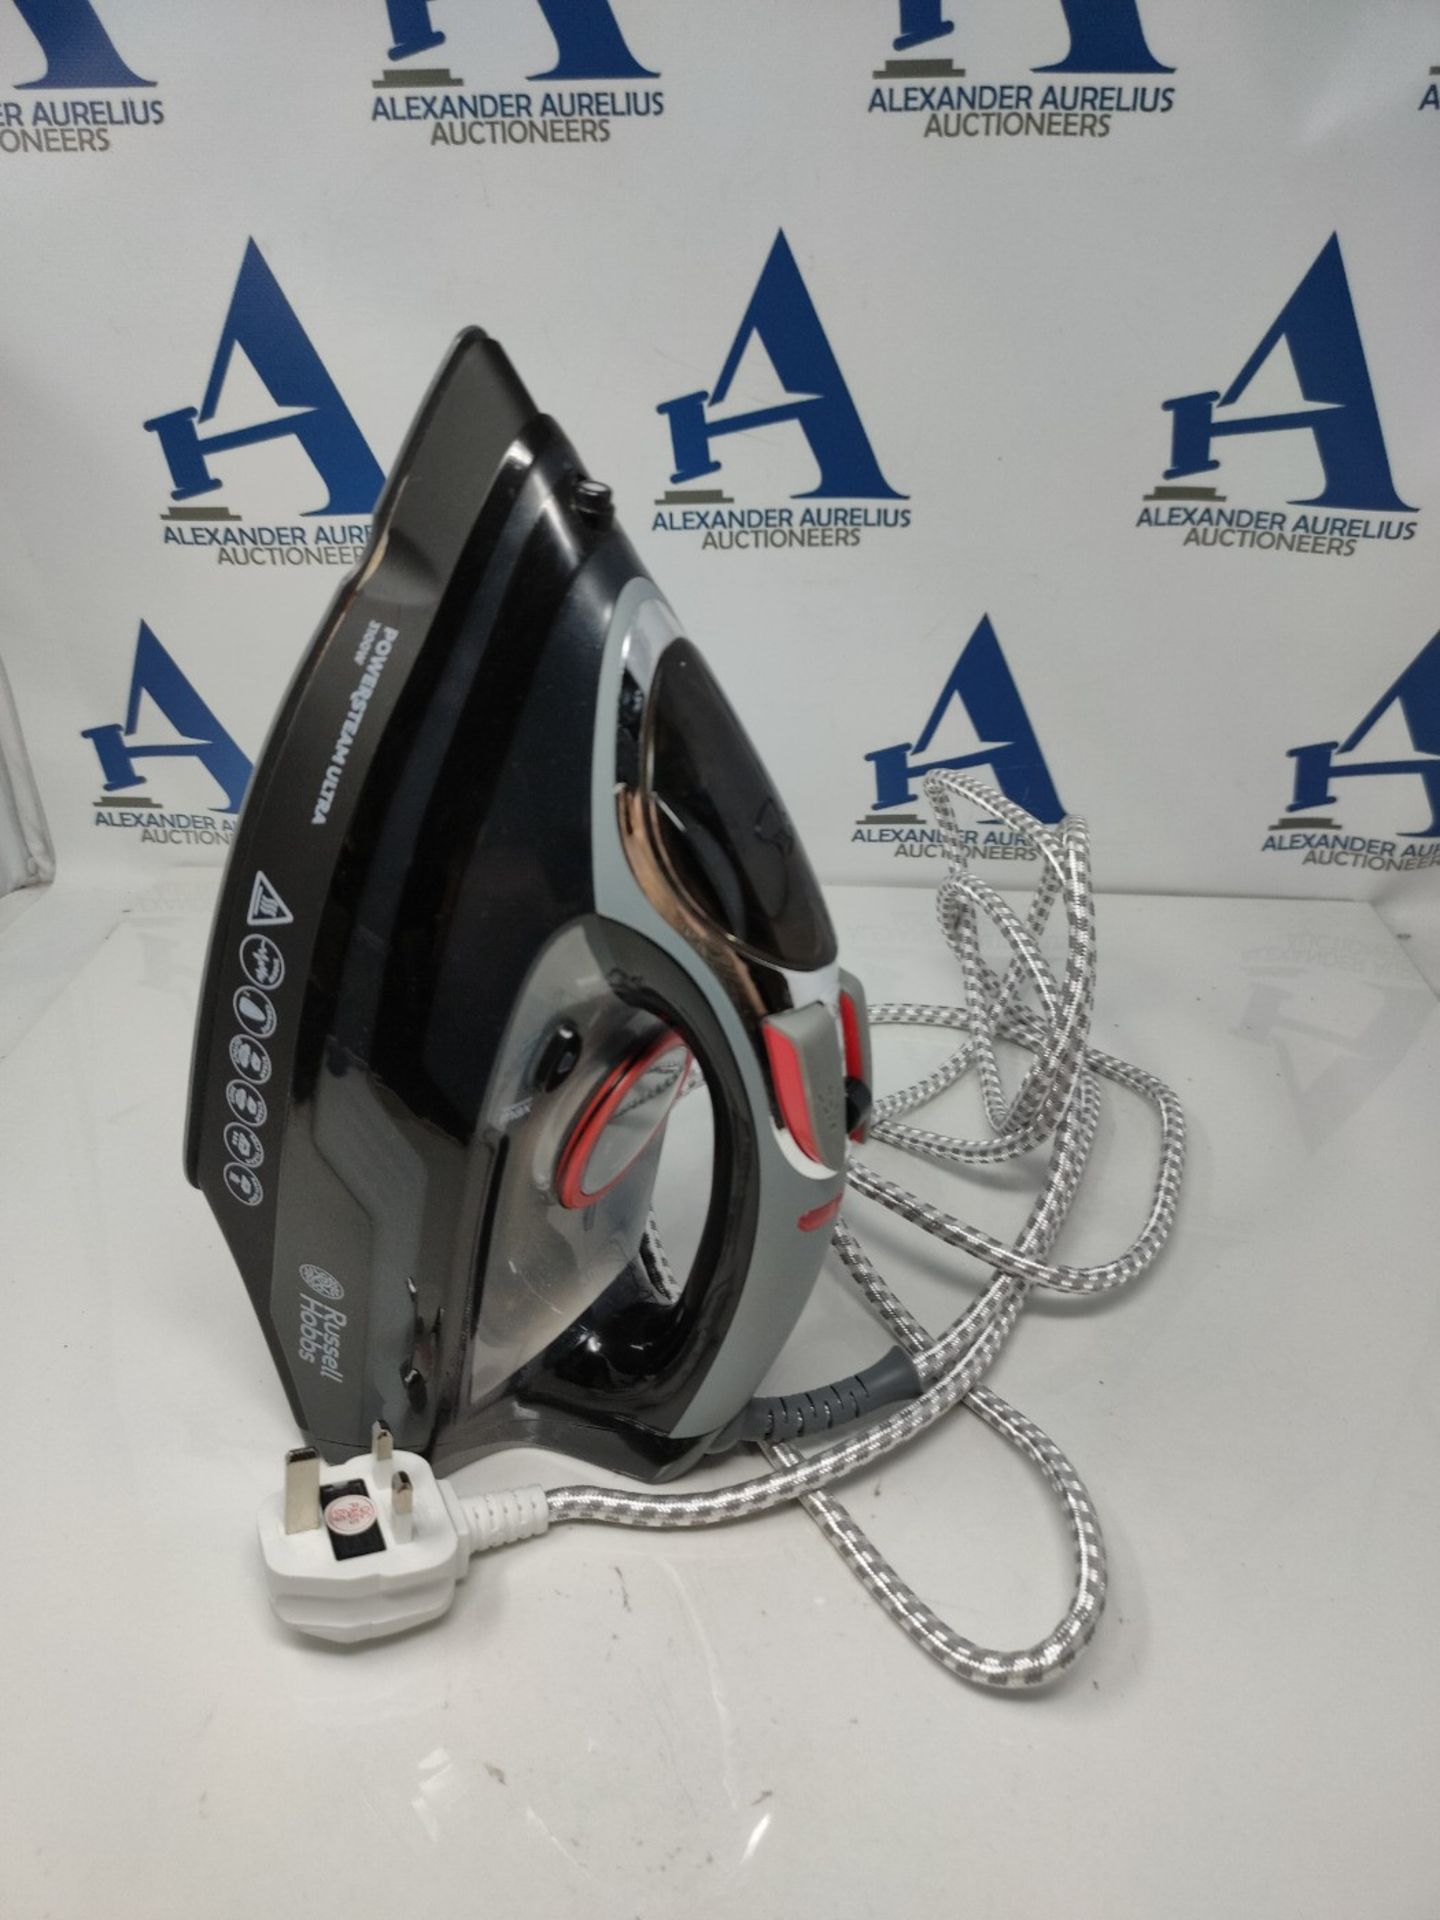 Russell Hobbs Powersteam Ultra 3100 W Vertical Steam Iron 20630 - Black and Grey - Image 3 of 3